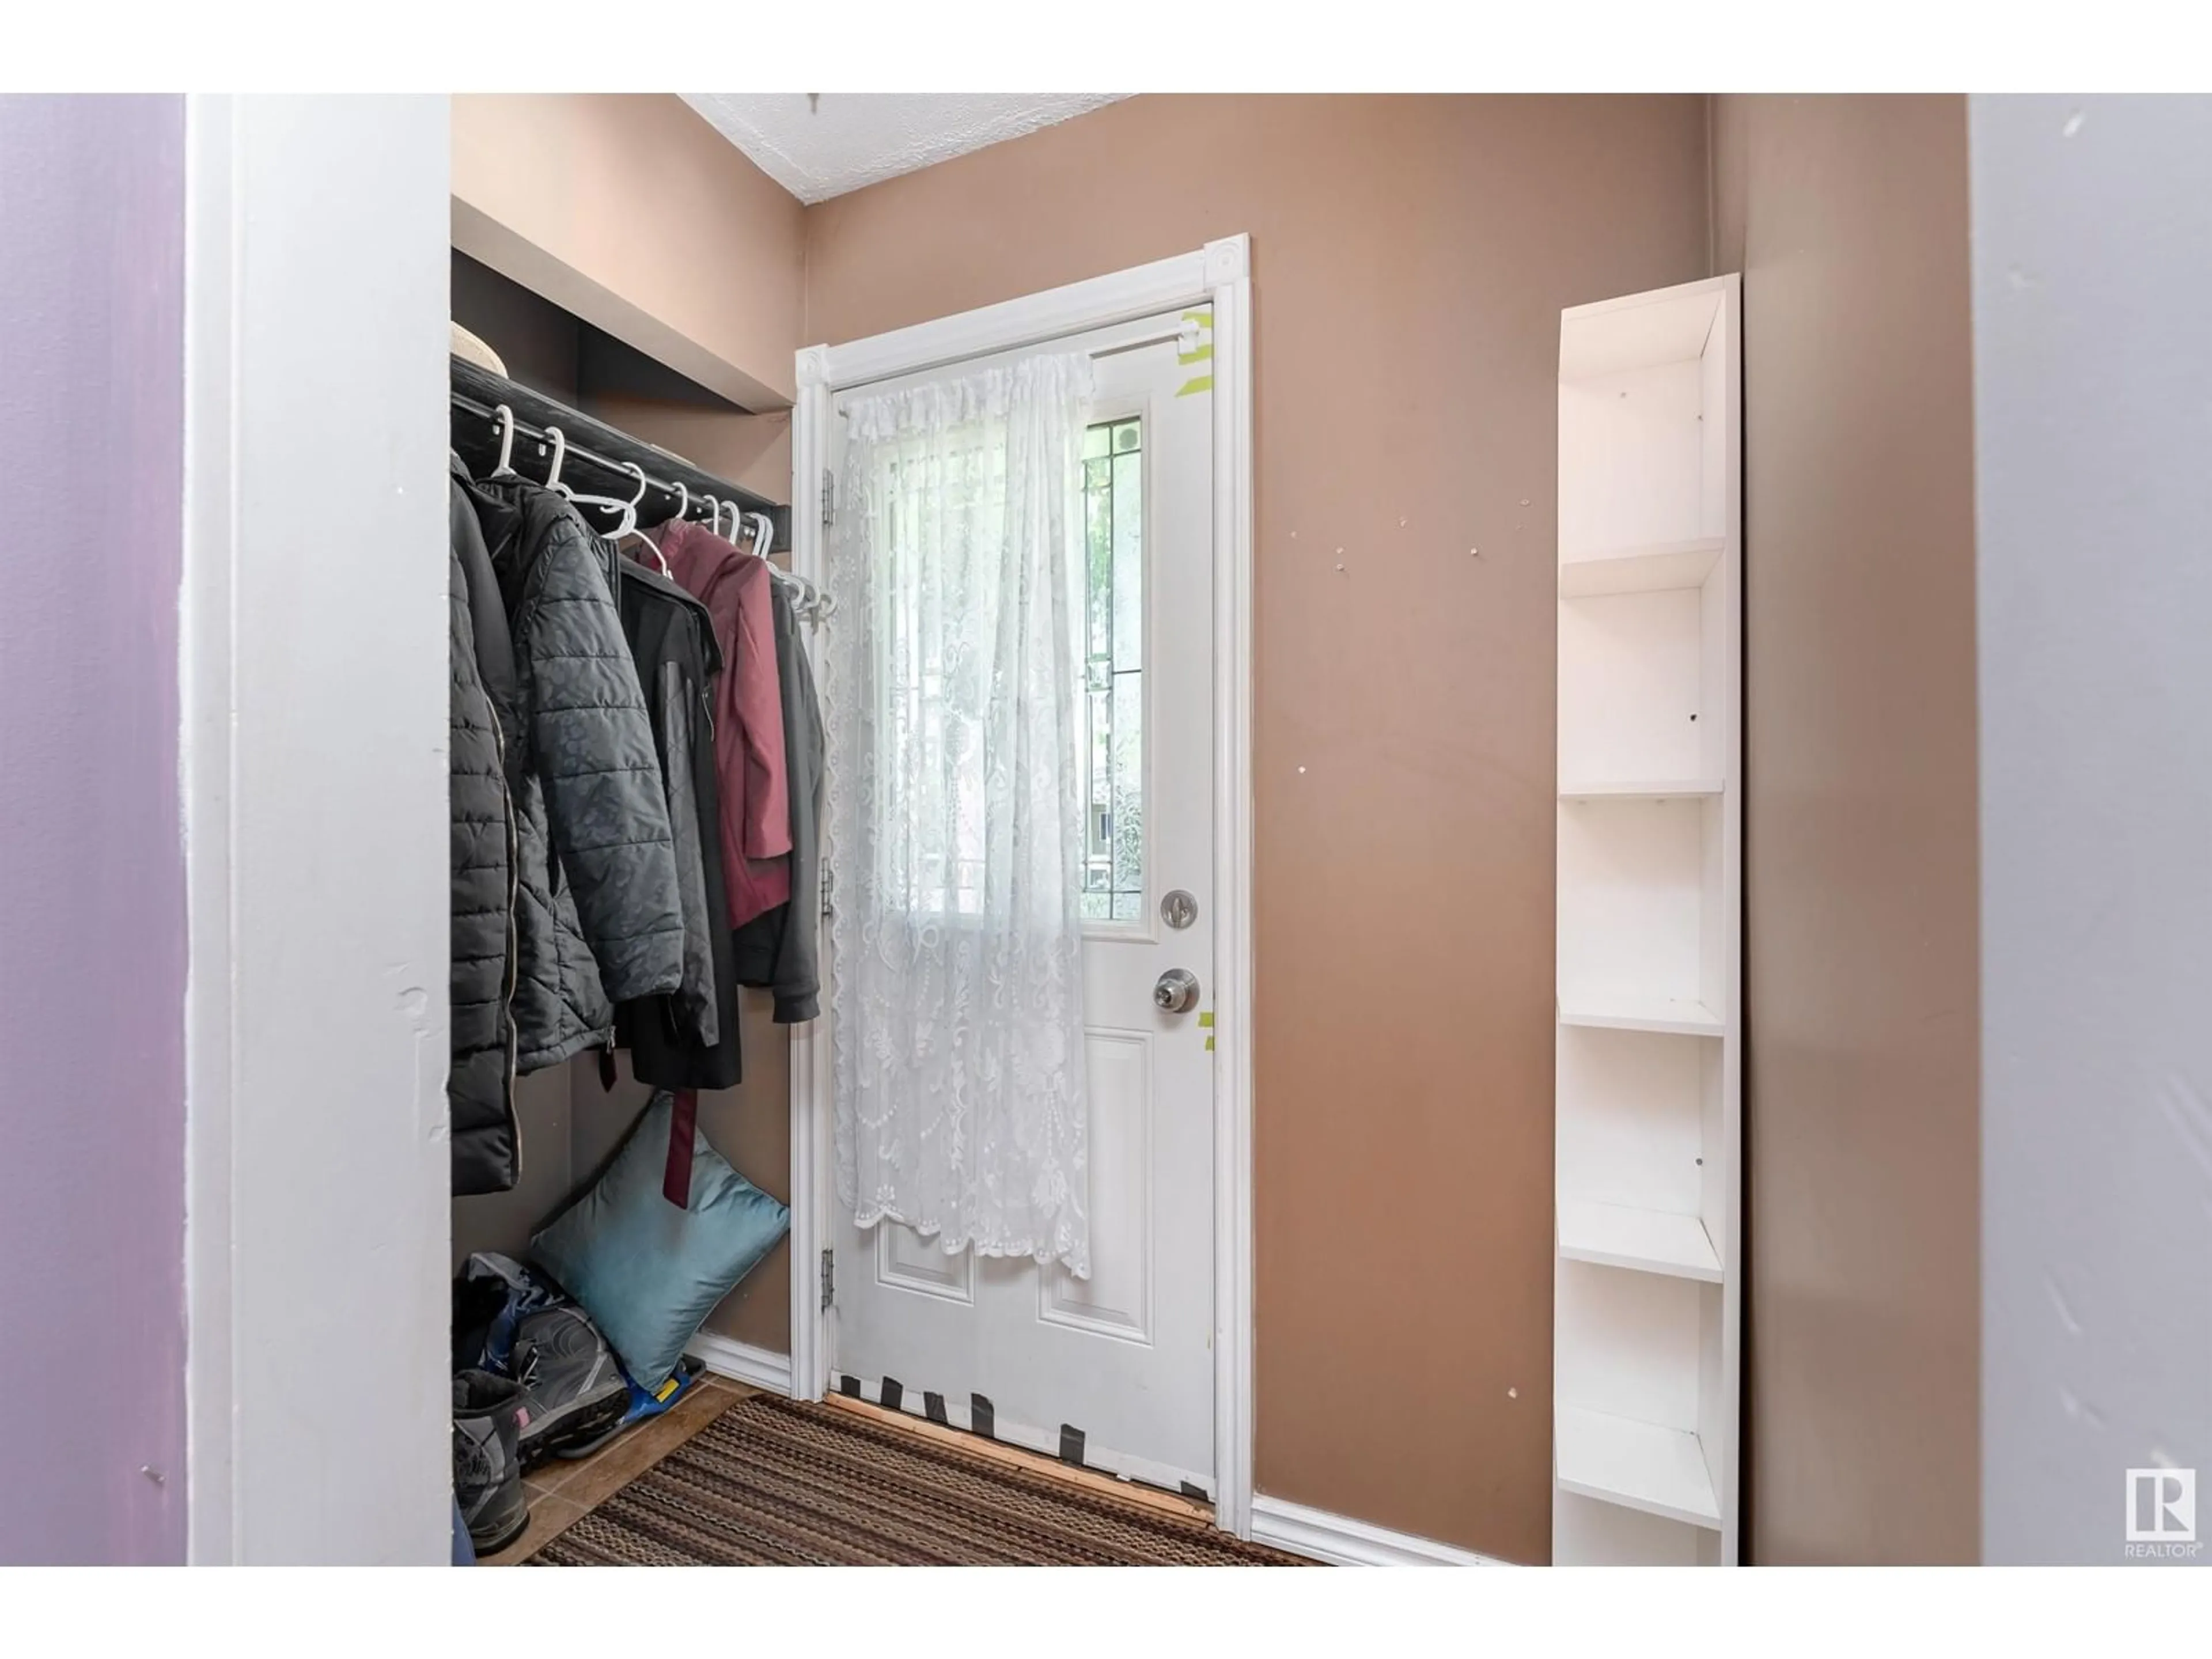 Storage room or clothes room or walk-in closet for 12125 63 ST NW, Edmonton Alberta T5W4G7